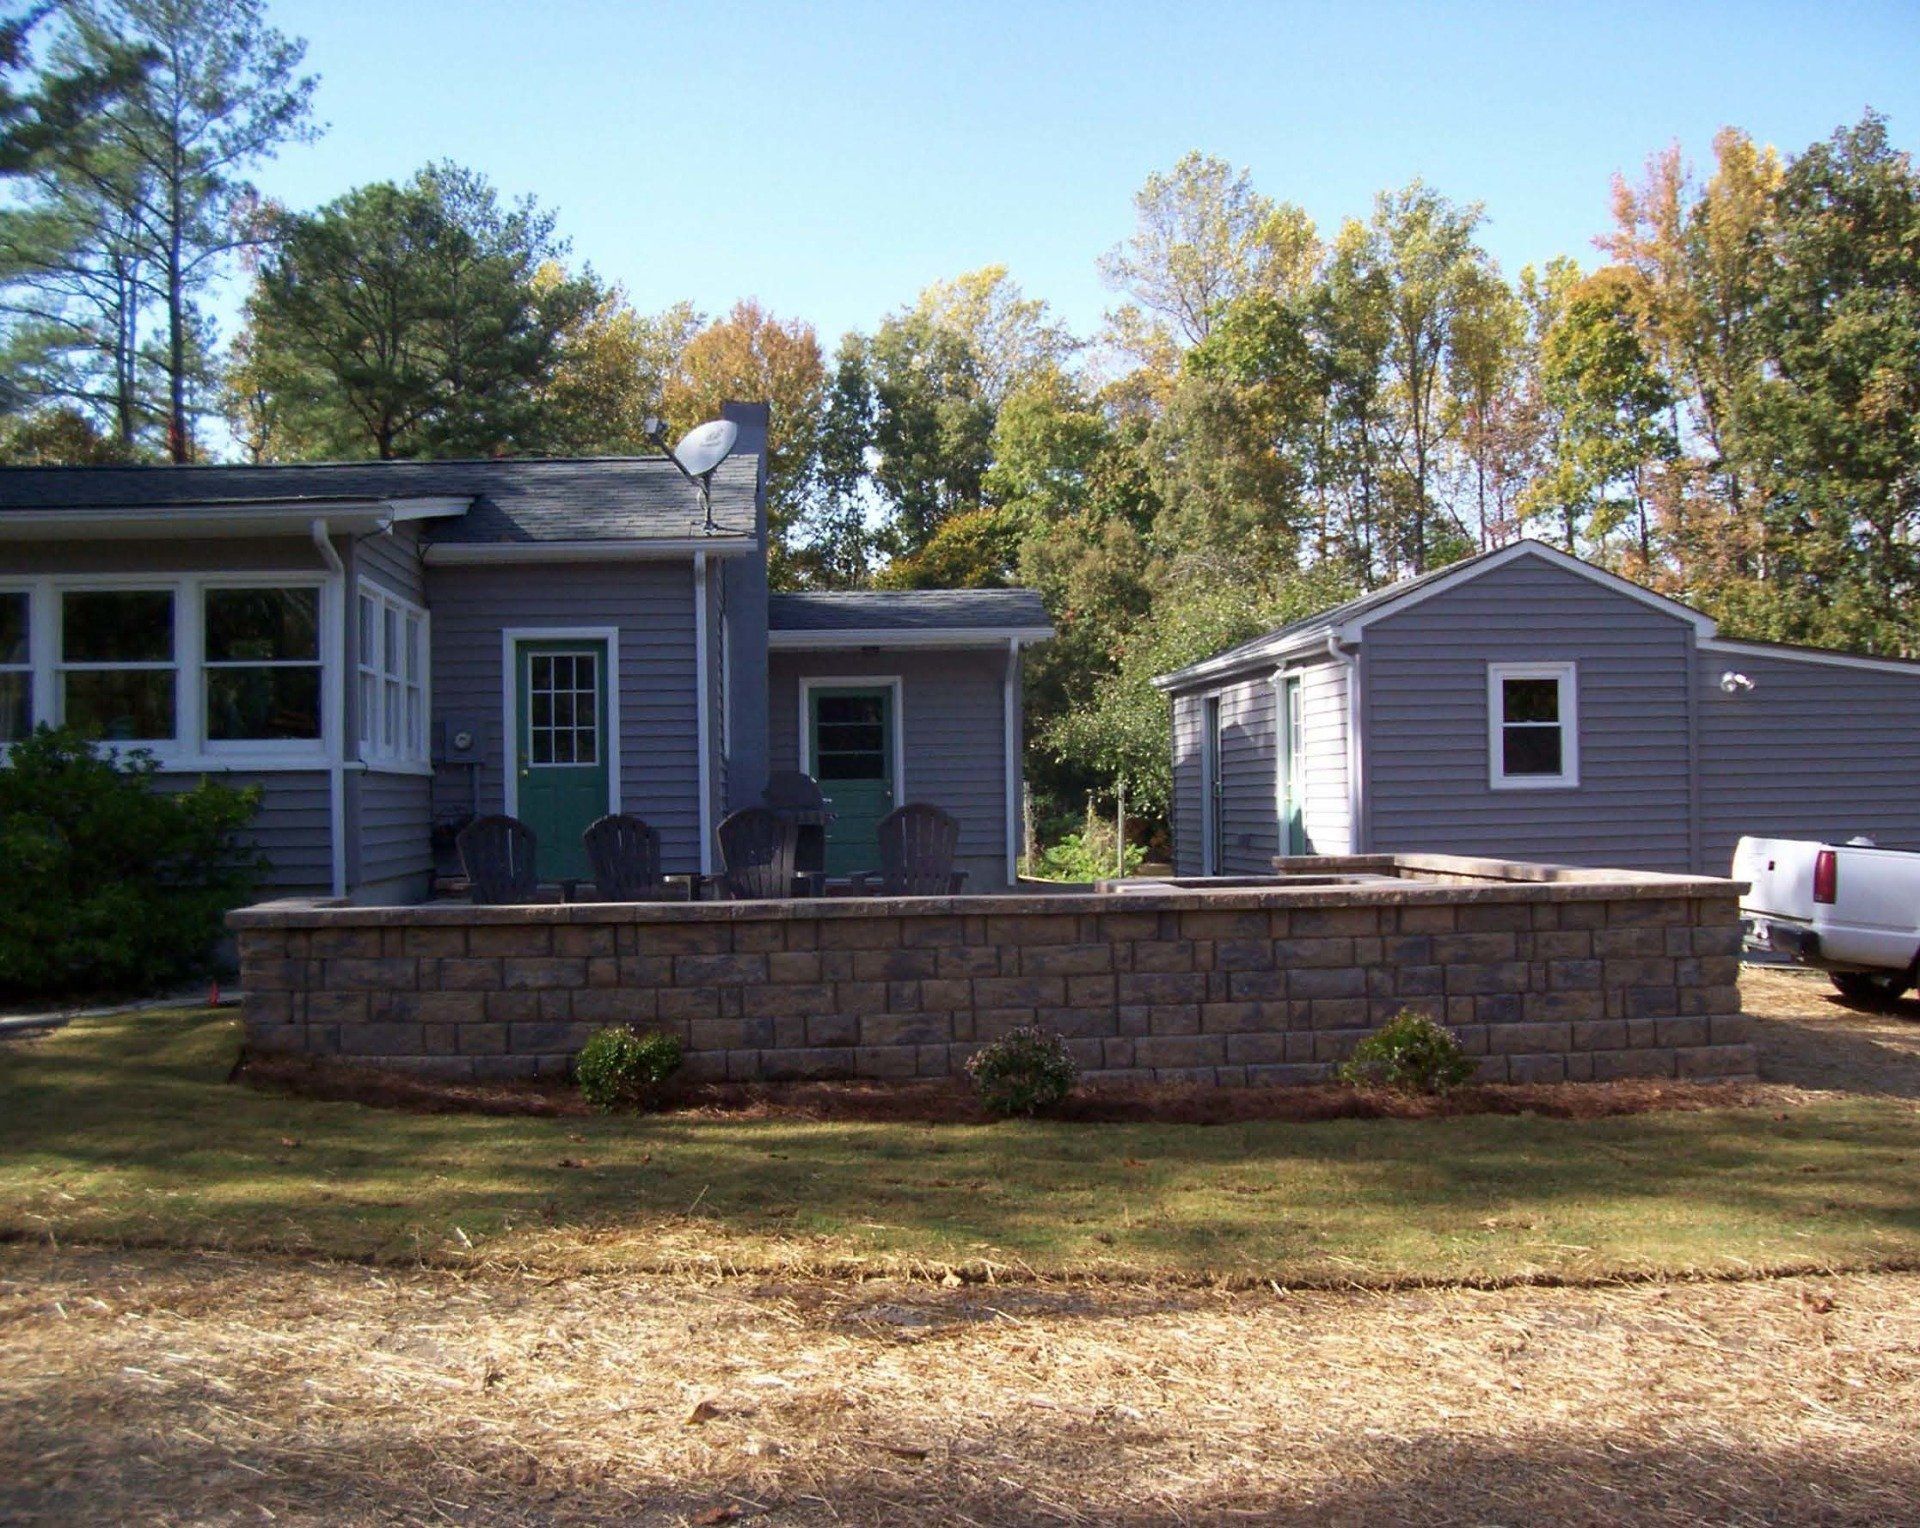 Municipal Landscaping — Retainer Wall In Middle Of Two Houses in Shacklefords, VA